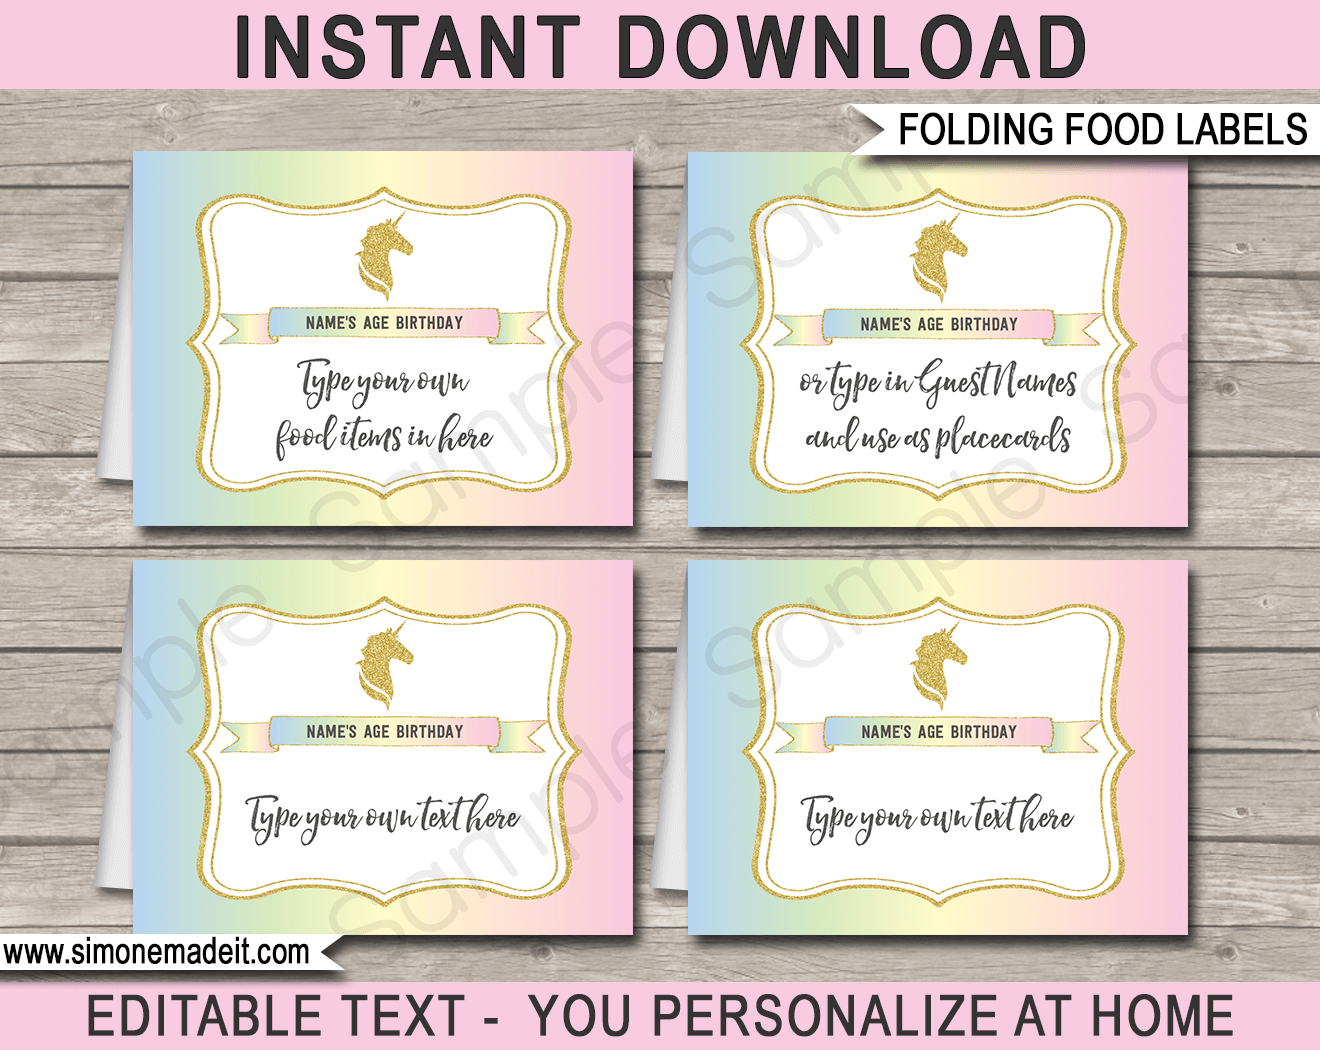 Unicorn Food Labels | Food Buffet Tags | Place Cards | Unicorn Theme Birthday Party | Editable DIY Template | Instant Download via SIMONEmadeit.com